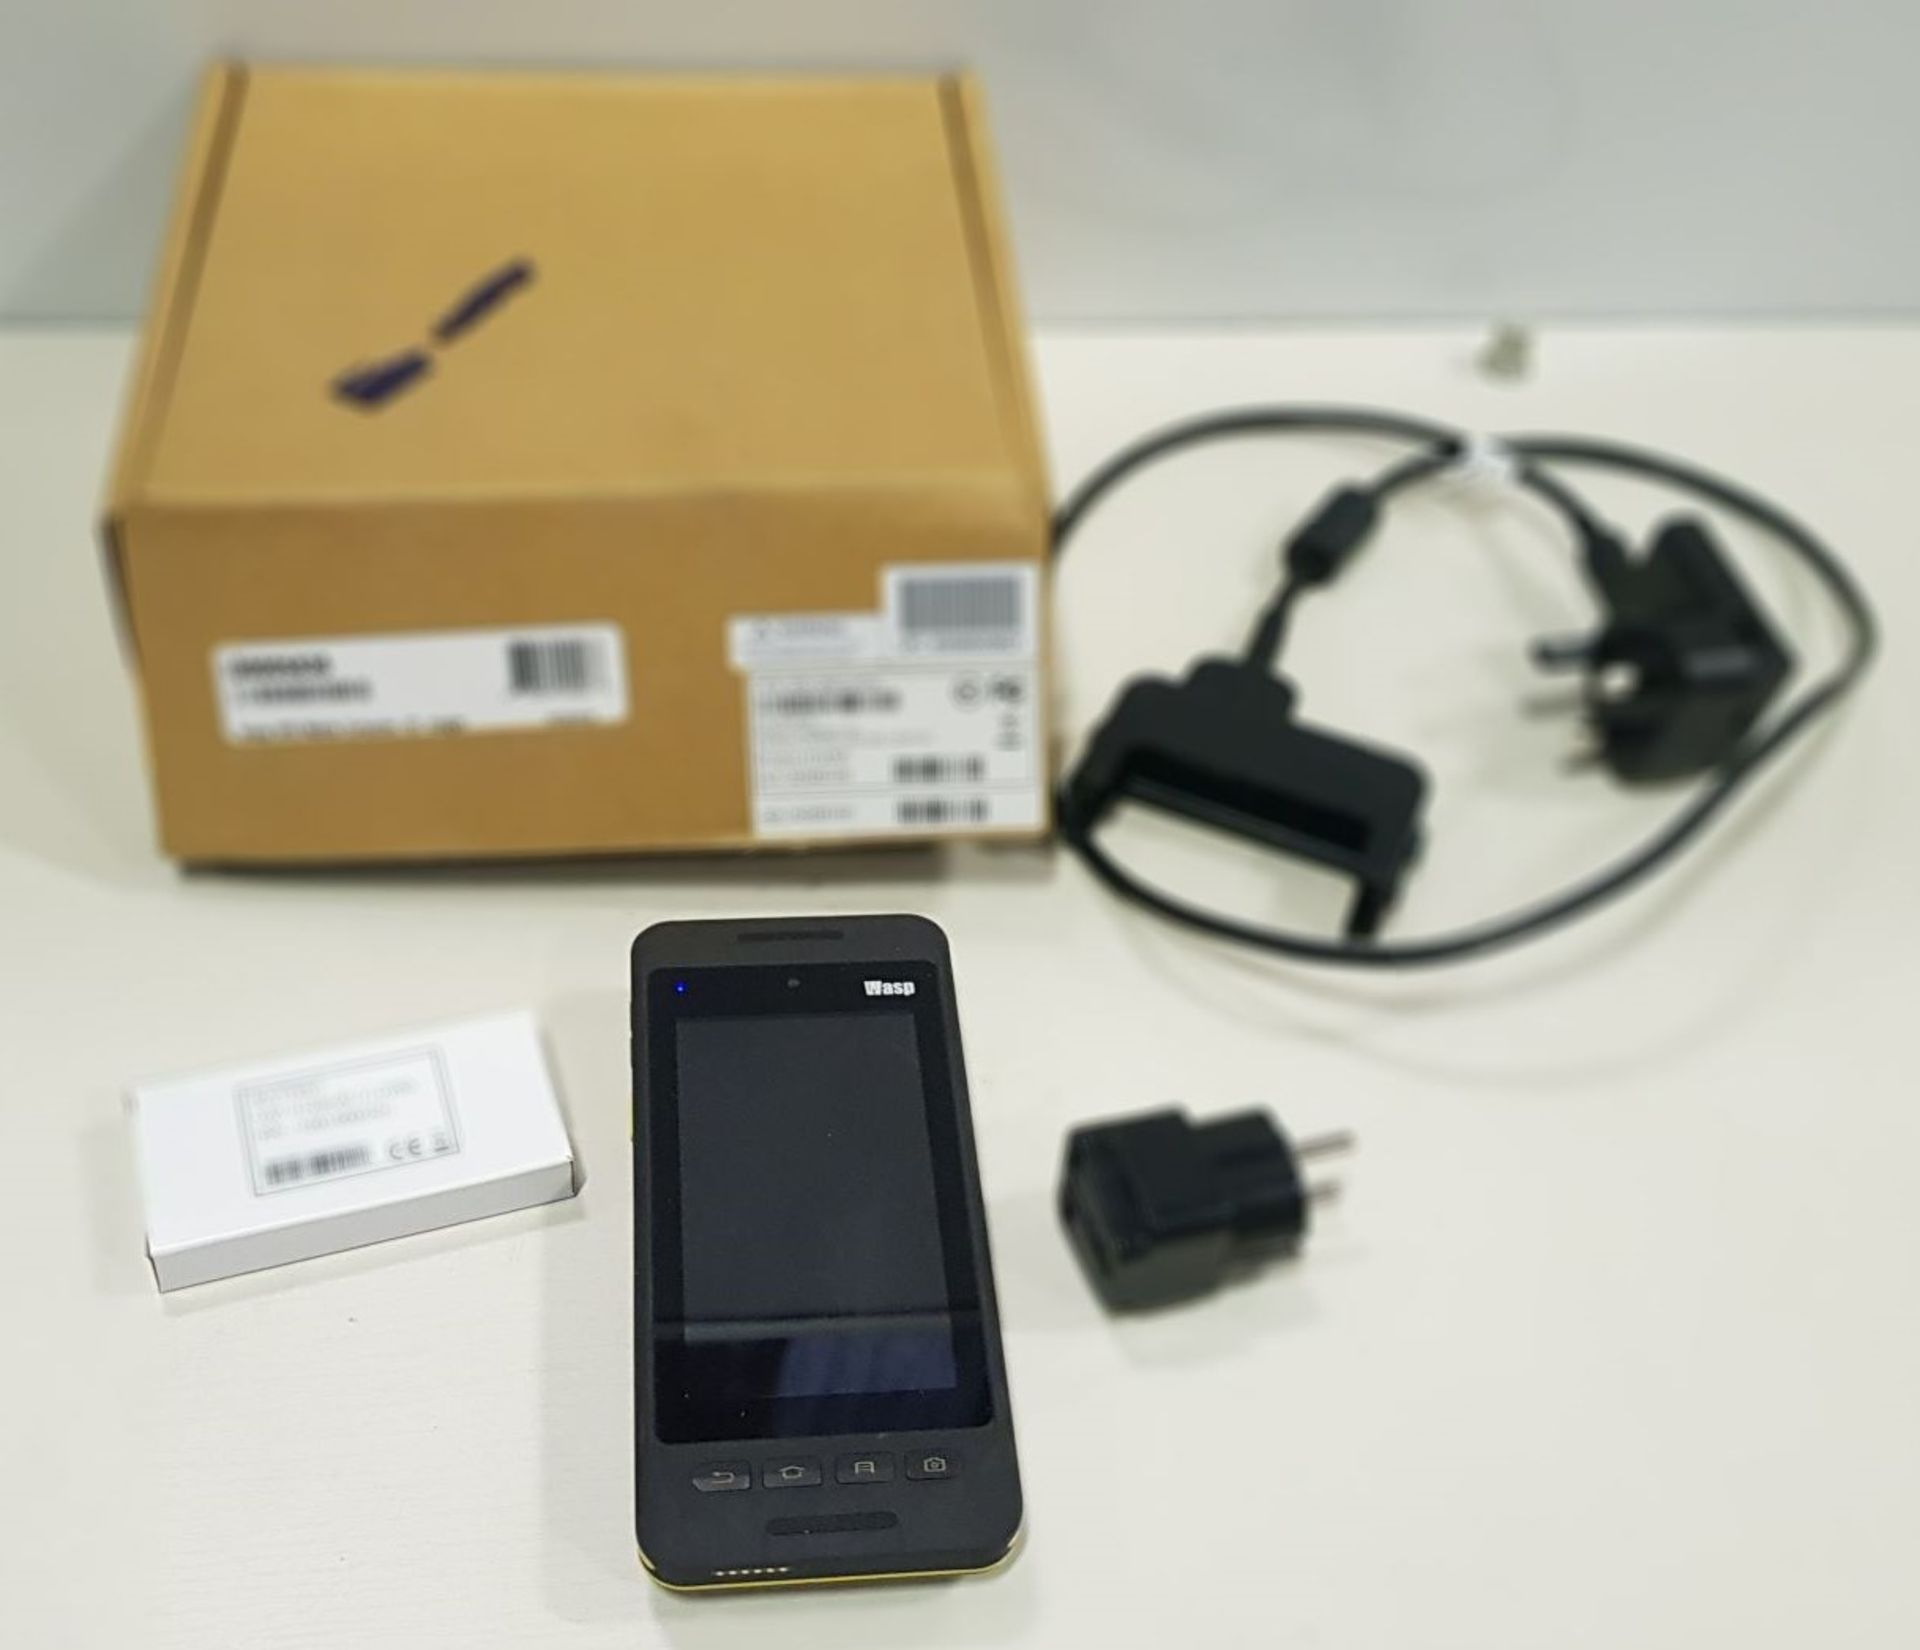 WASP DR3 MOBILE COMPUTER 2D IMAGER (BARCODE SCANNER) WITH CHARGER AND BOX